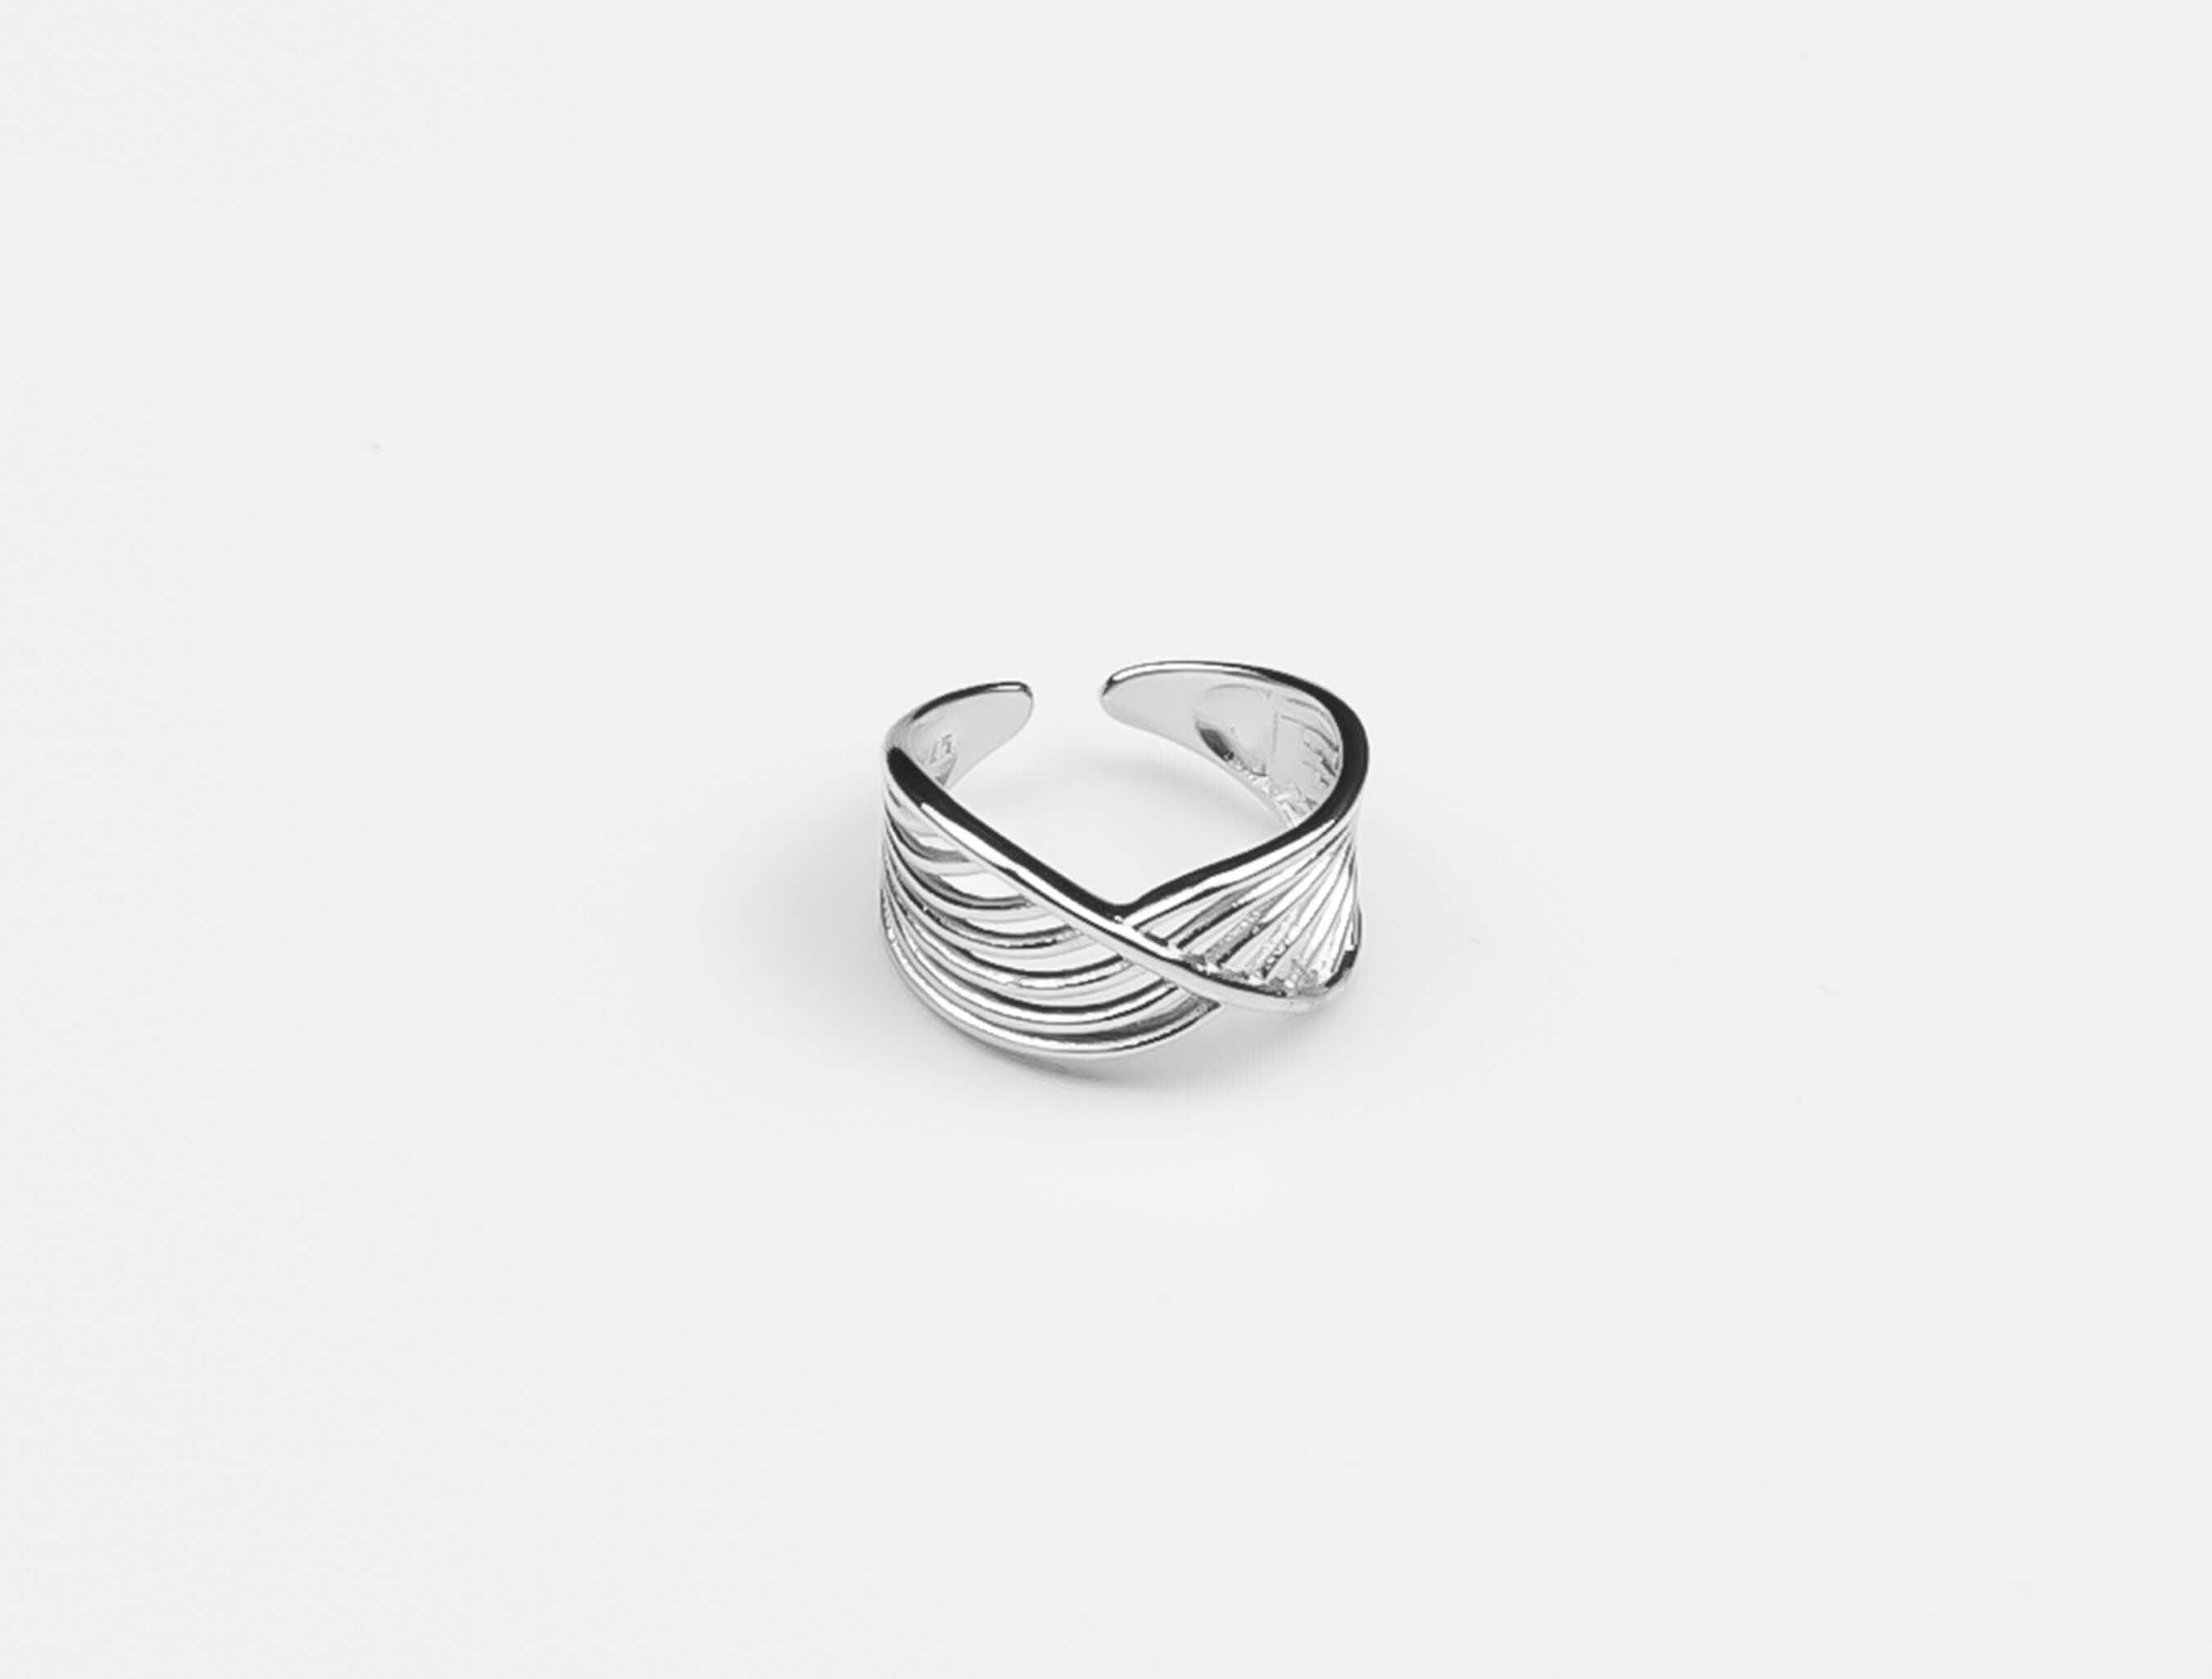 Delicate Chunky Silver Ring, Sterling Silver Statement Ring, Ring For Women, Adjustment Ring, Boho Ring, Thumb Ring, Minimalist Ring, Christmas Gifts available at Moyoni Design